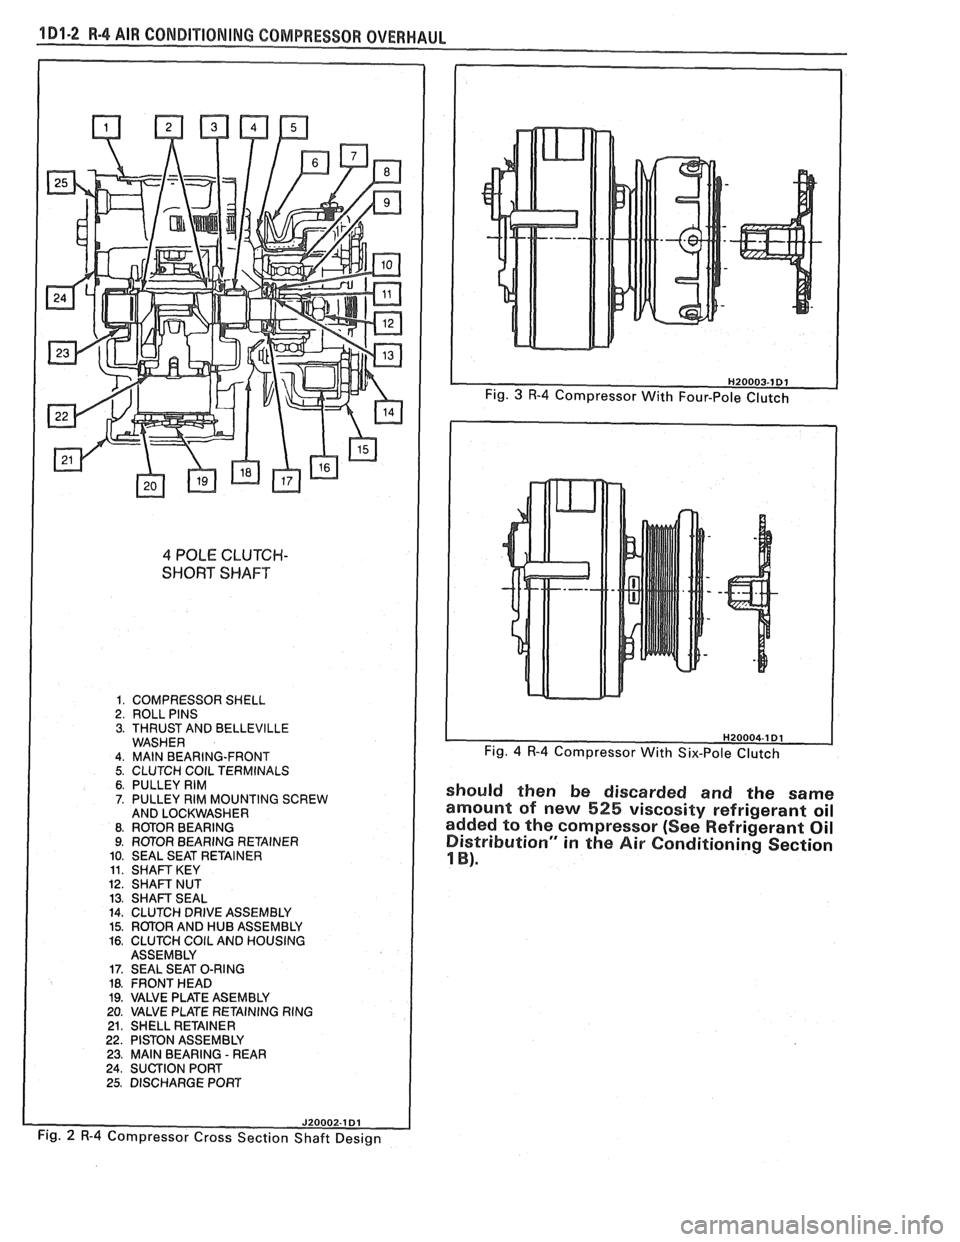 PONTIAC FIERO 1988  Service Repair Manual 
1 Dl-2 R-4 AIR CONDITIONING COMP 
4 POLE CLUTCH- 
SHORT SHAFT 
1. COMPRESSOR SHELL 2. ROLL PINS 3. THRUST AND BELLEVILLE WASHER 4. MAlN BEARING-FRONT 5. CLUTCH COlL TERMINALS 6. PULLEY RIM 7. PULLEY 